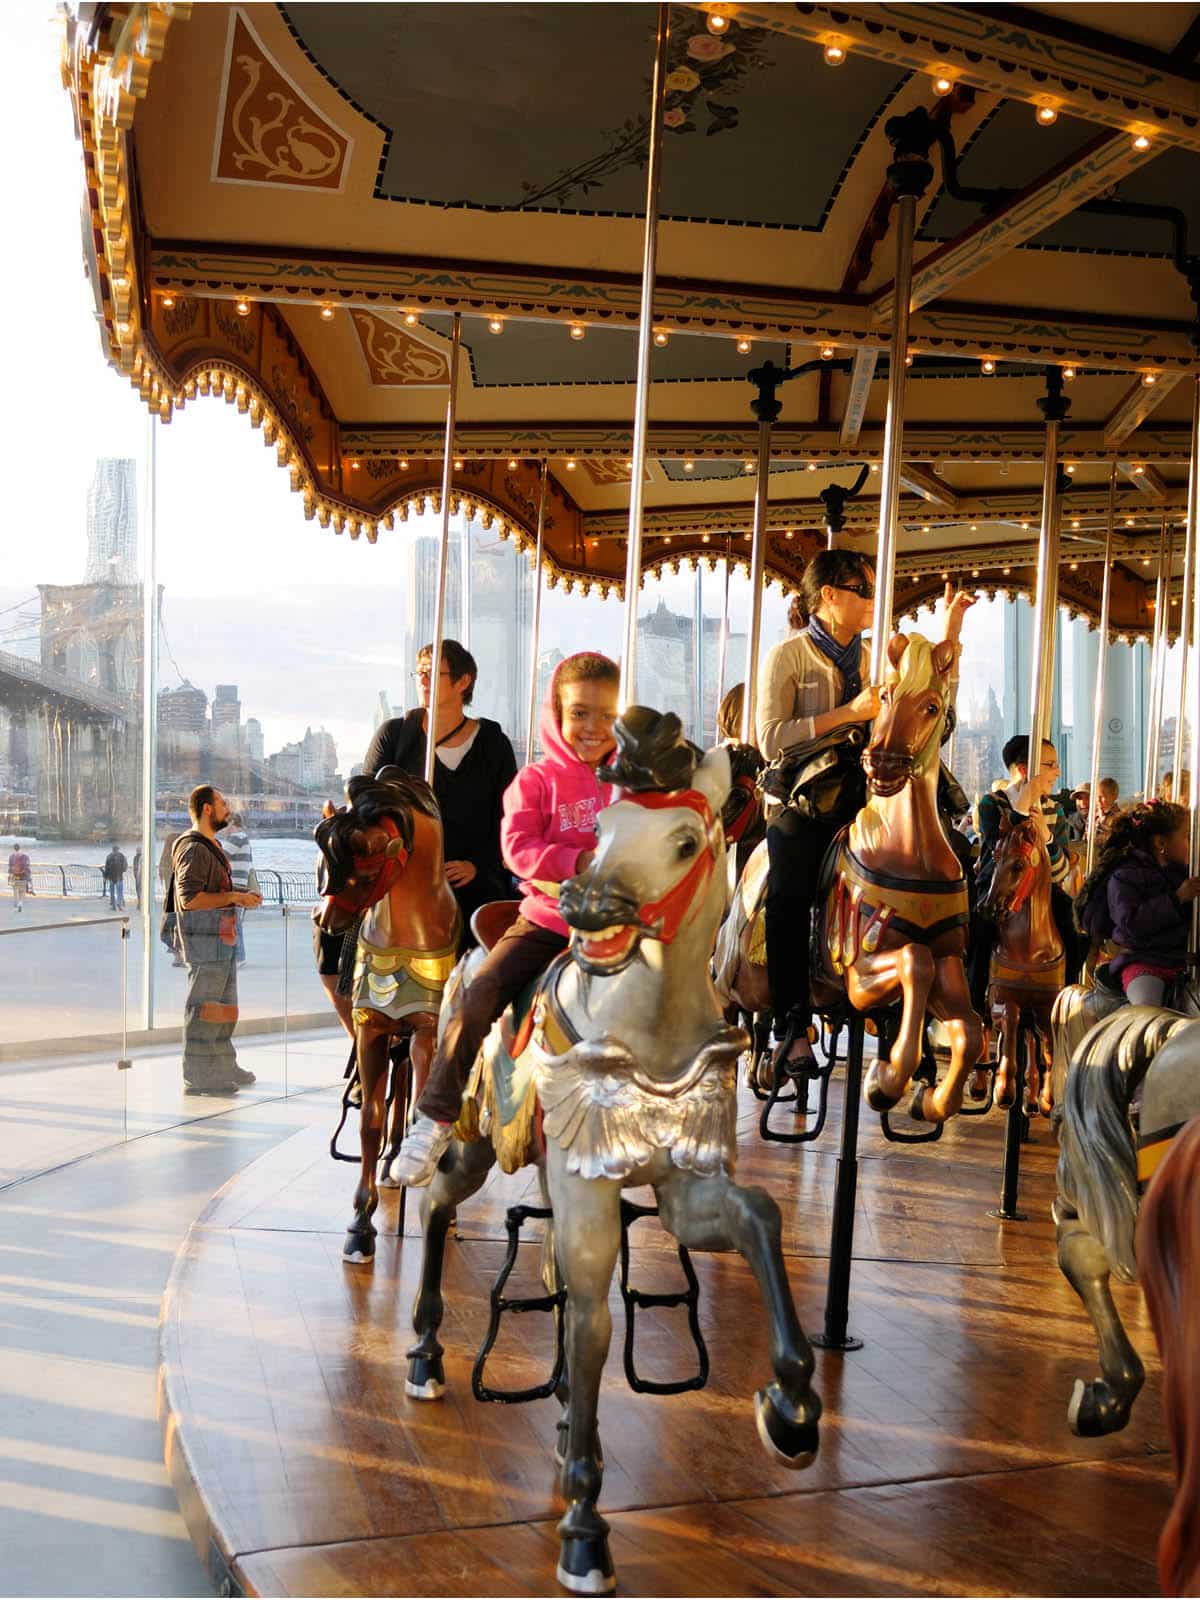 Children and adults on horses on Jane's Carousel at sunset.